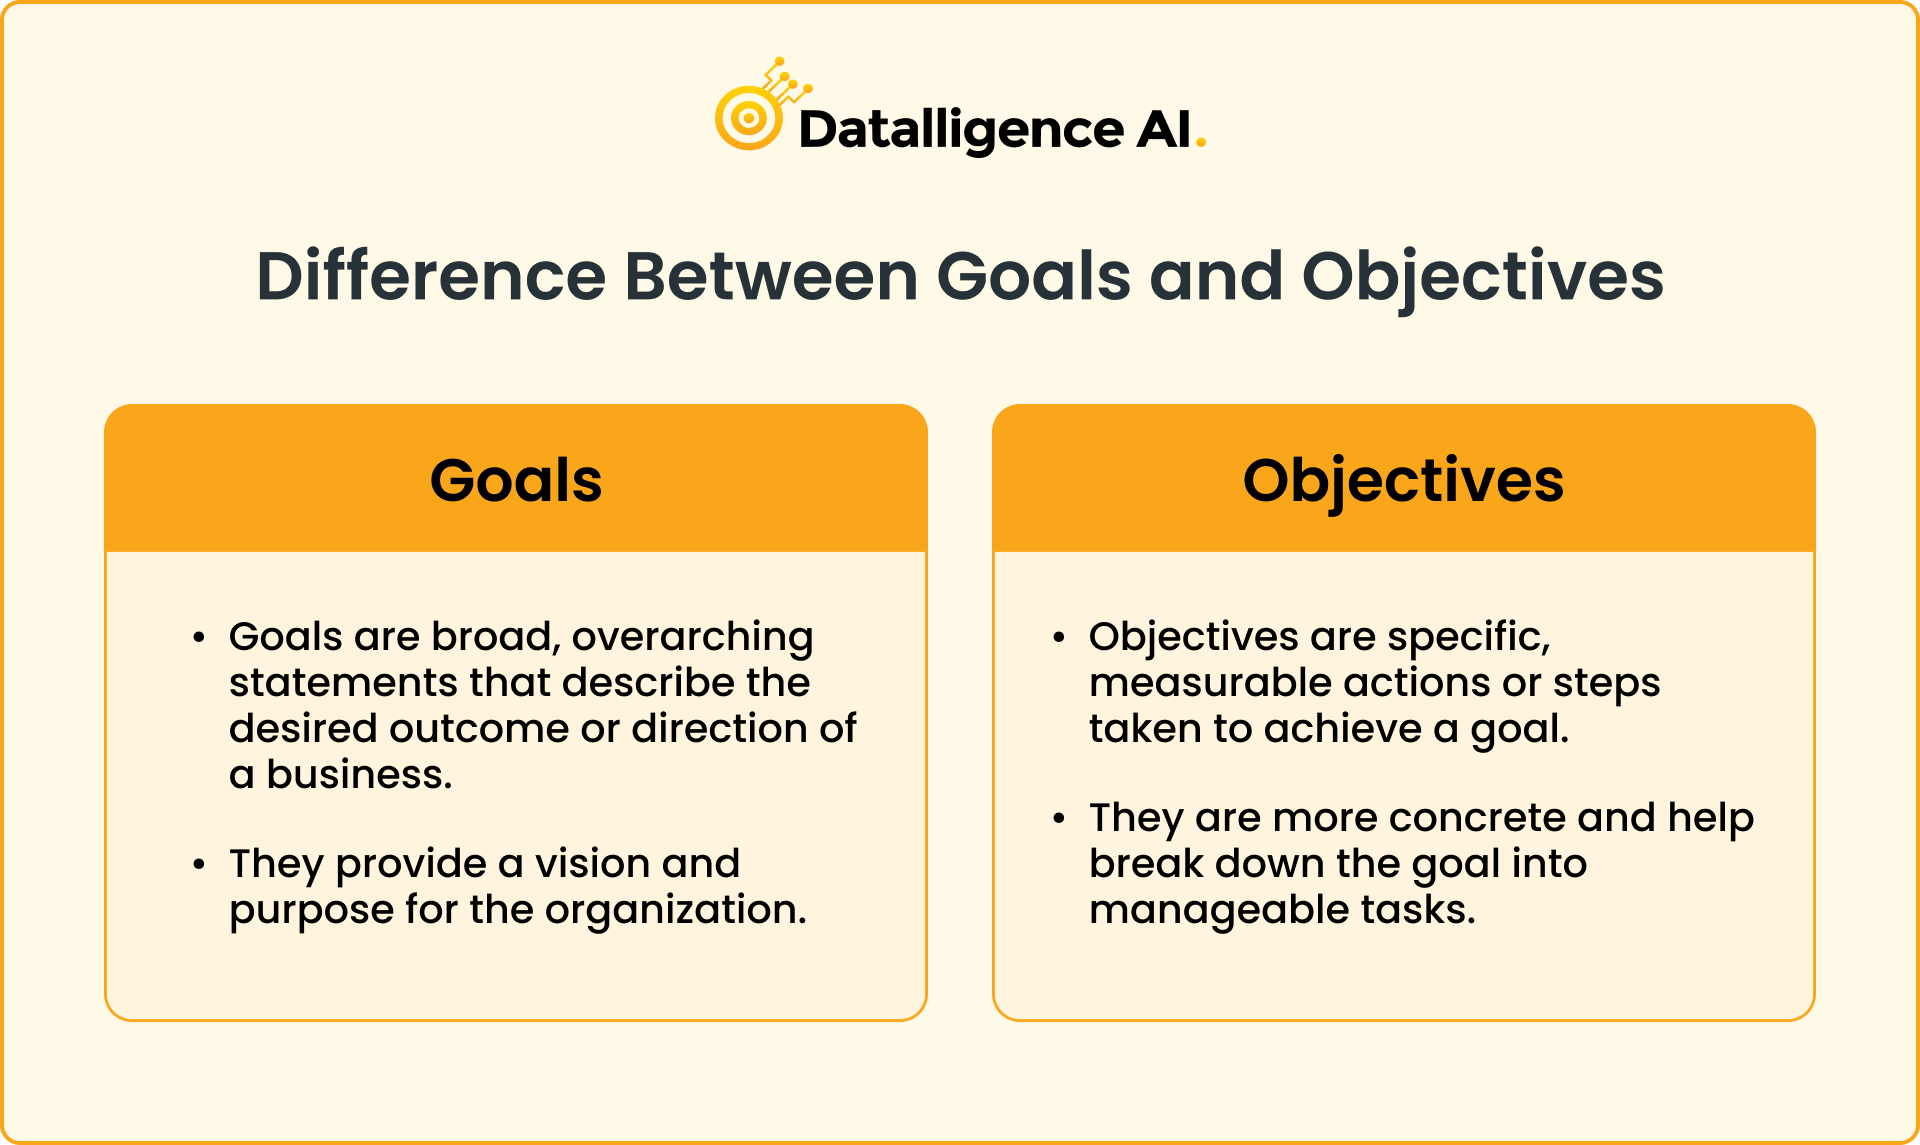 Difference Between Goals and Objectives